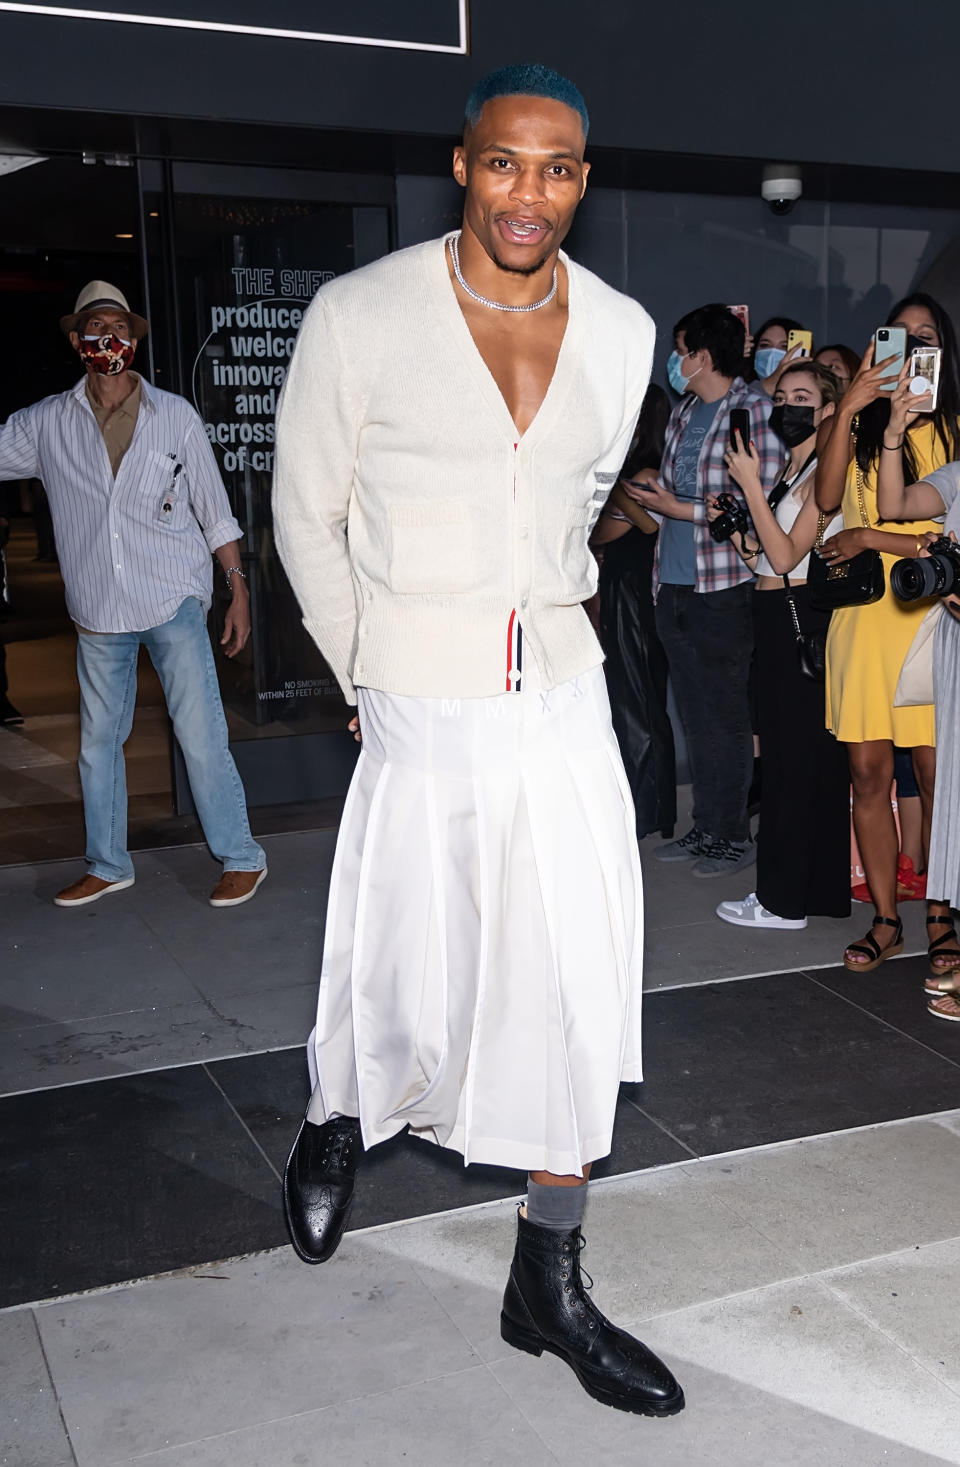 NEW YORK, NEW YORK - SEPTEMBER 11:  Russell Westbrook is seen leaving the Thom Browne Spring 2022 Collection during New York Fashion Week at The Griffin Theatre at The Shed on September 11, 2021 in New York City. (Photo by Gilbert Carrasquillo/GC Images)